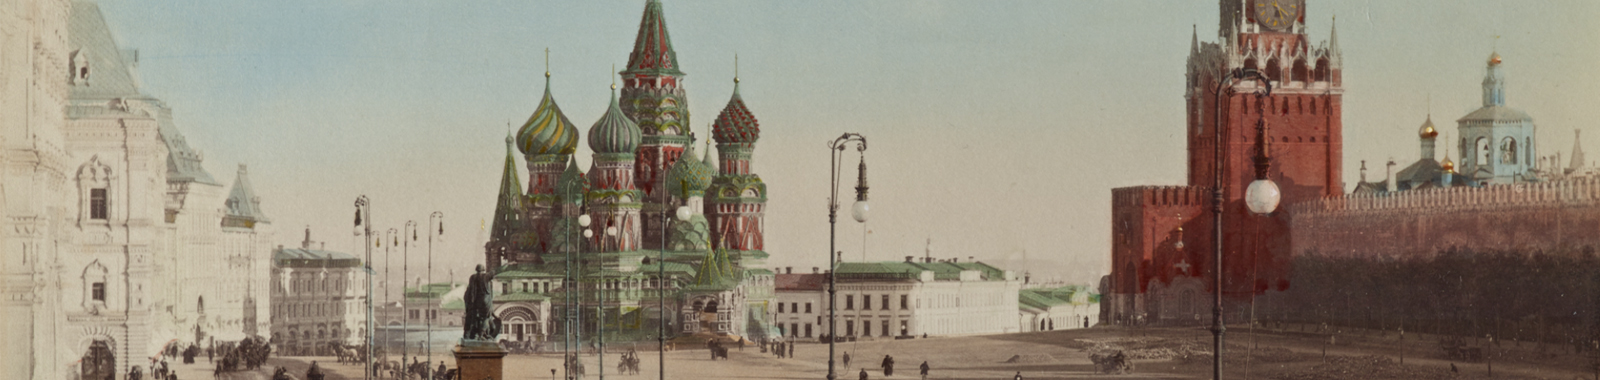 Detail of handtinted photograph by Bulla, circa 1900, of Red Square, Moscow